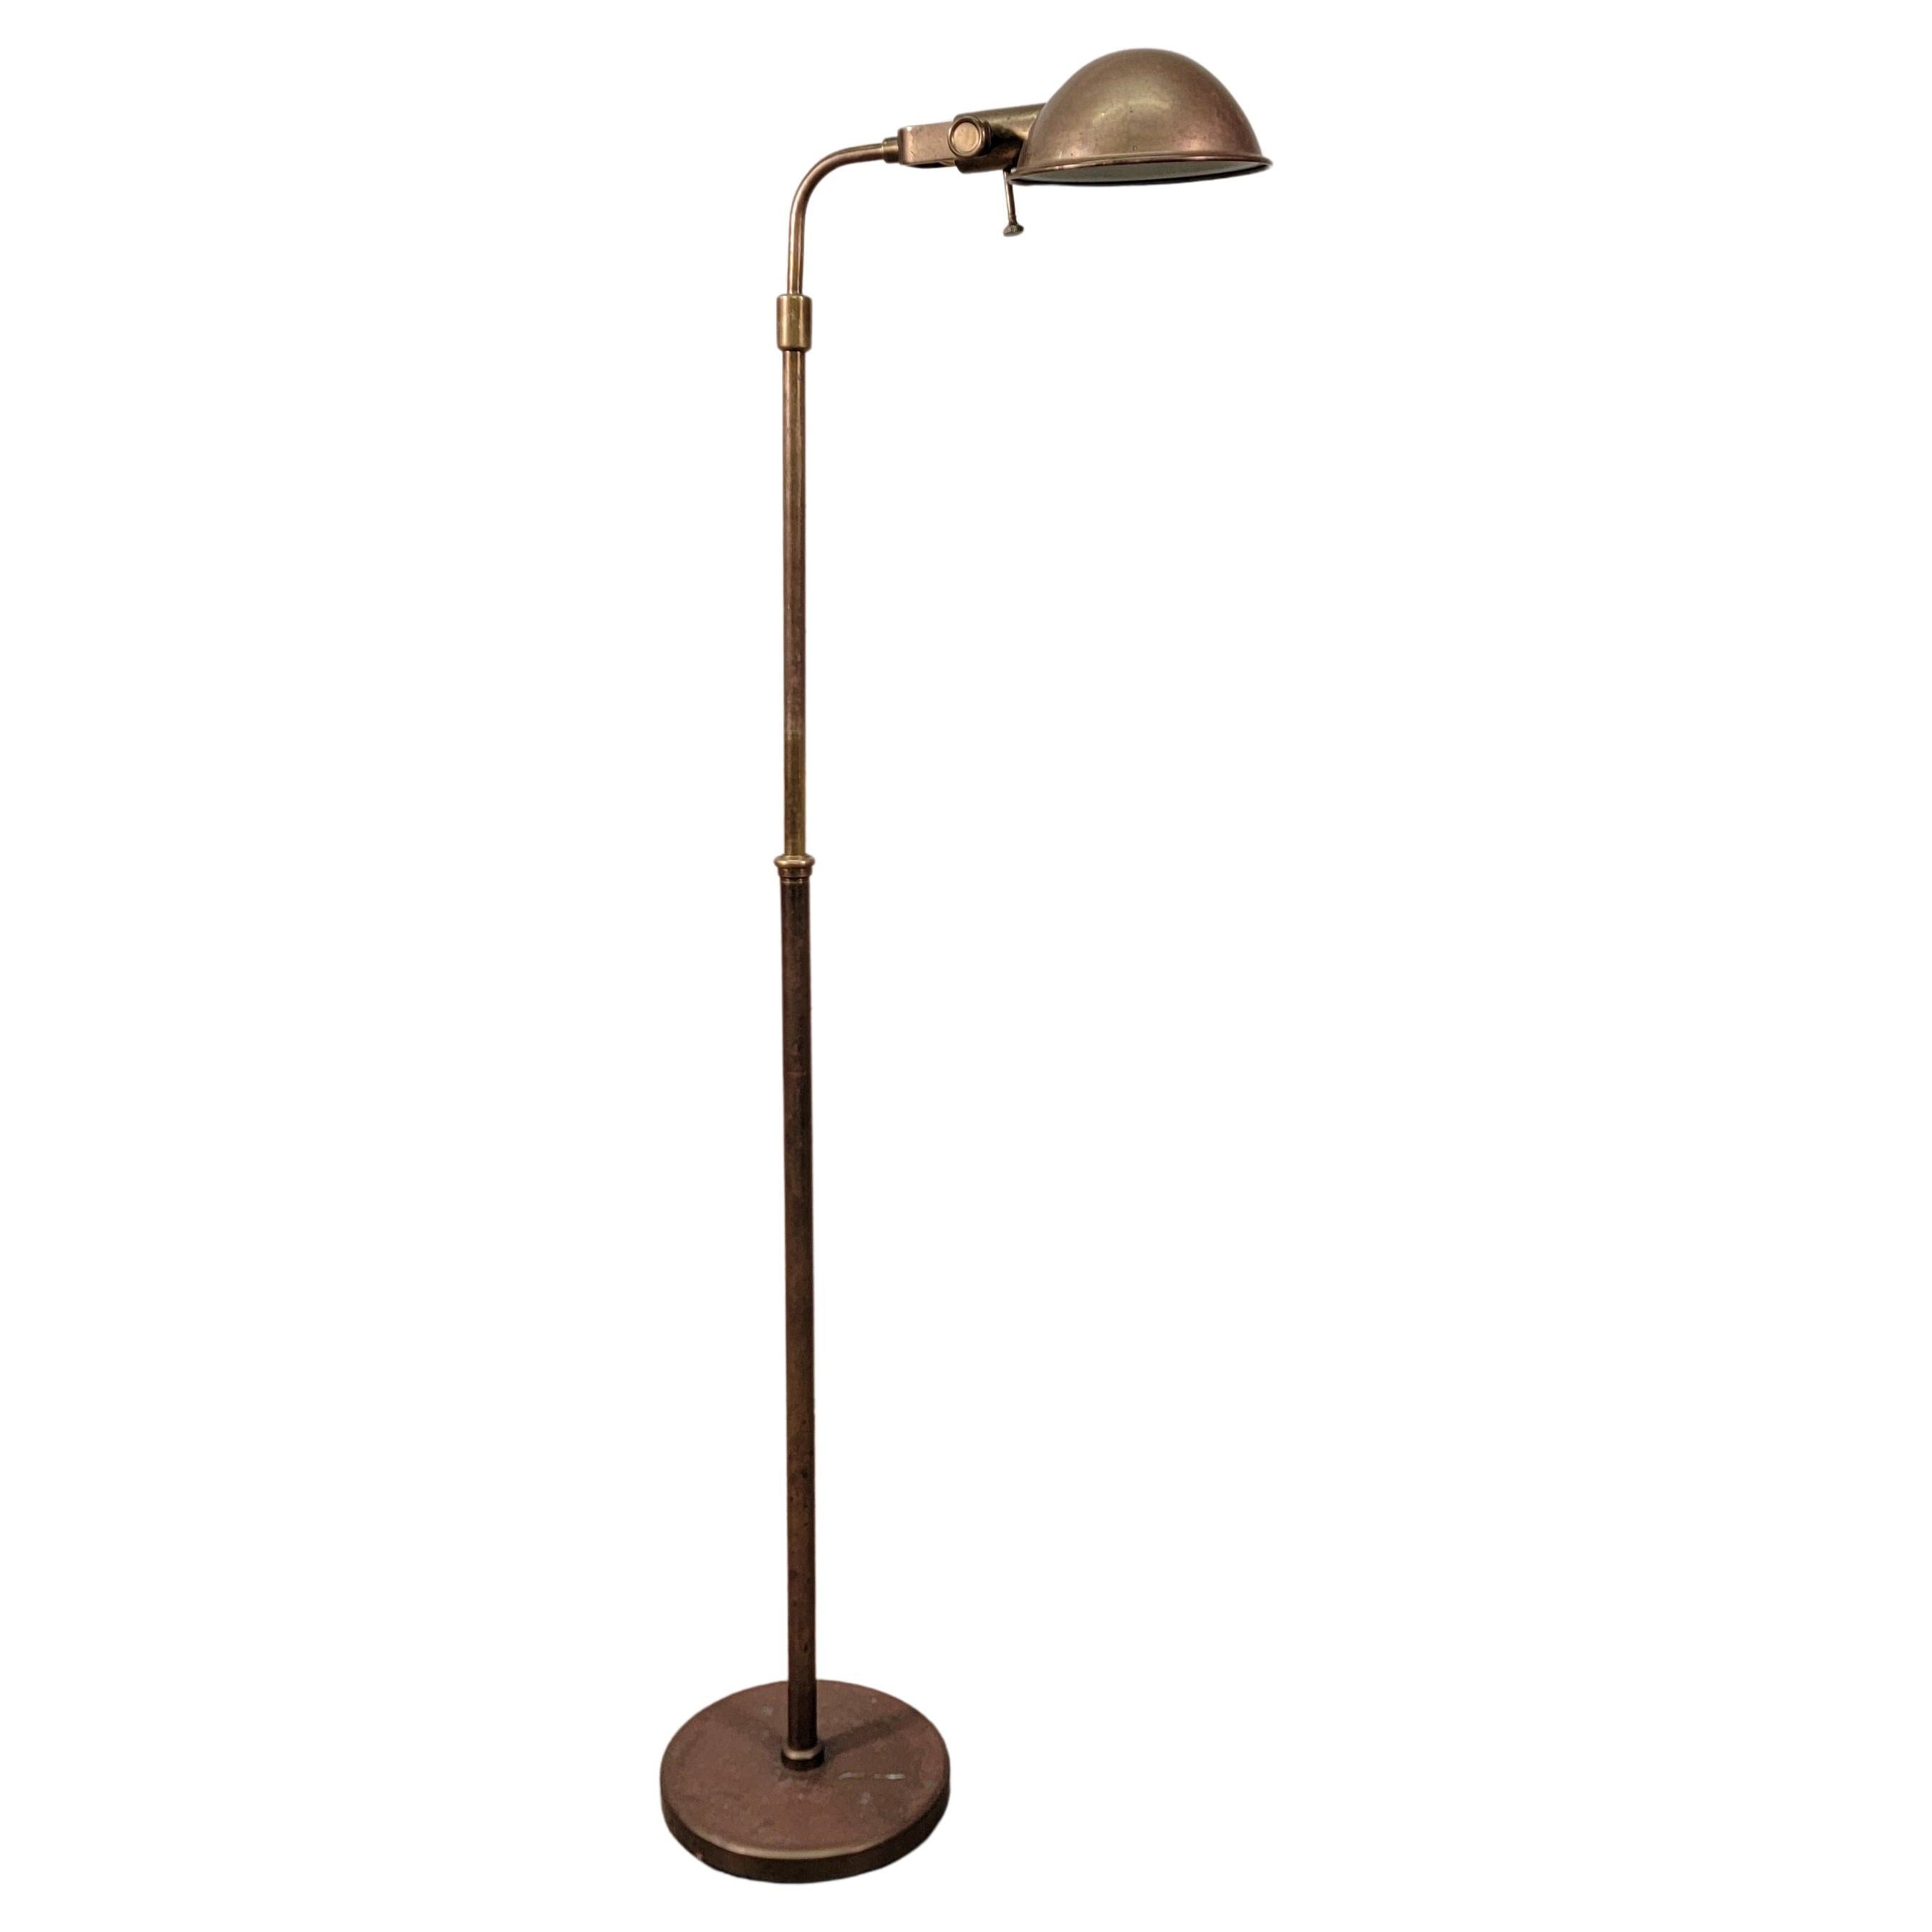 How tall should floor lamps be?